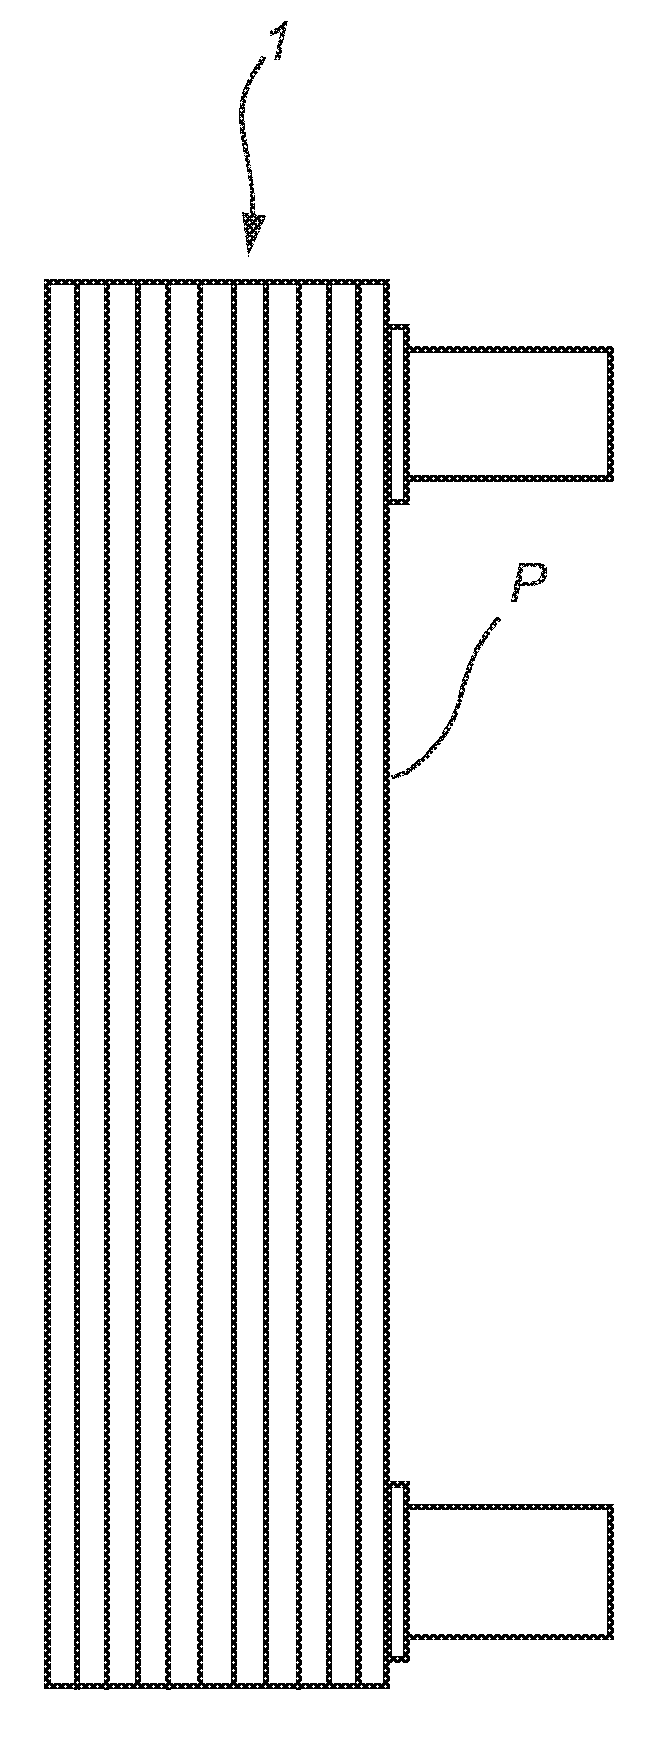 System and method for dynamic control of a heat exchanger